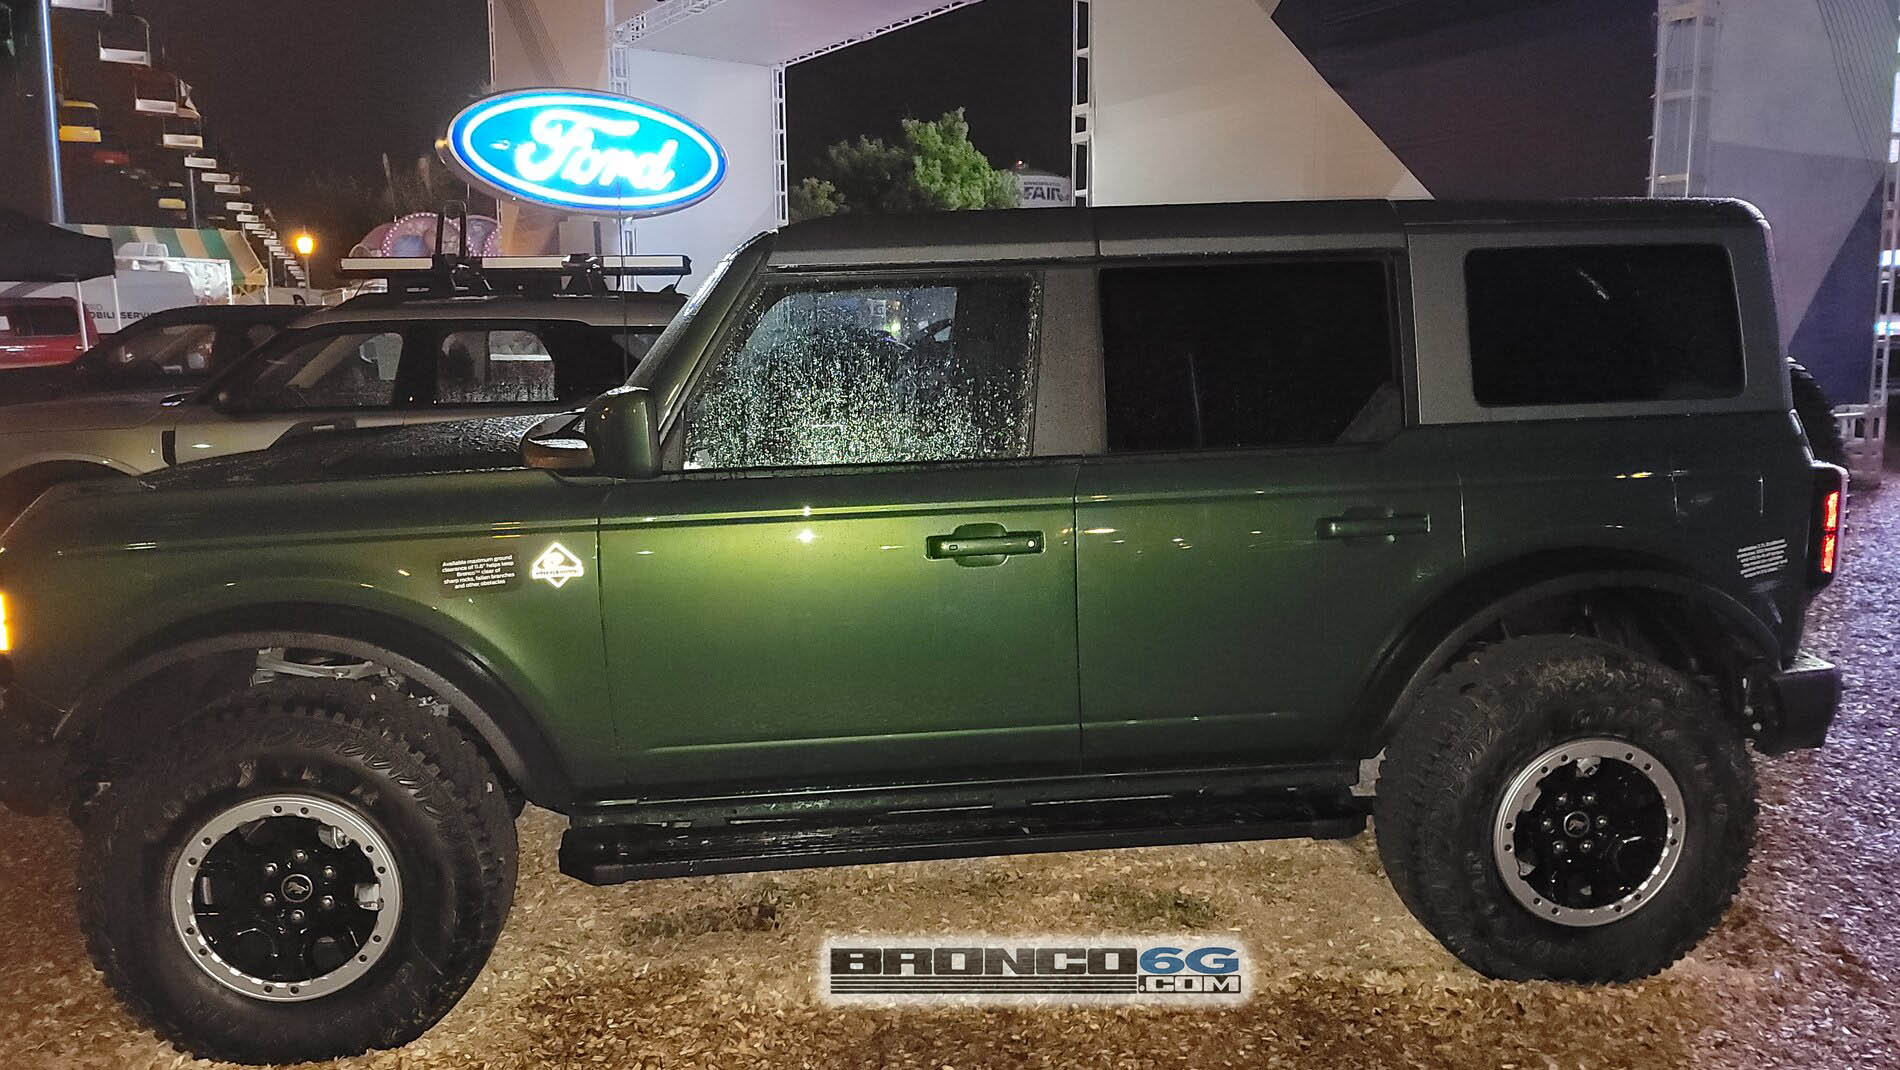 Ford Bronco Eruption Green Bronco Outer Banks spotted at MN State fair 2022 Bronco Euruption Green Outer Banks Spotted 2